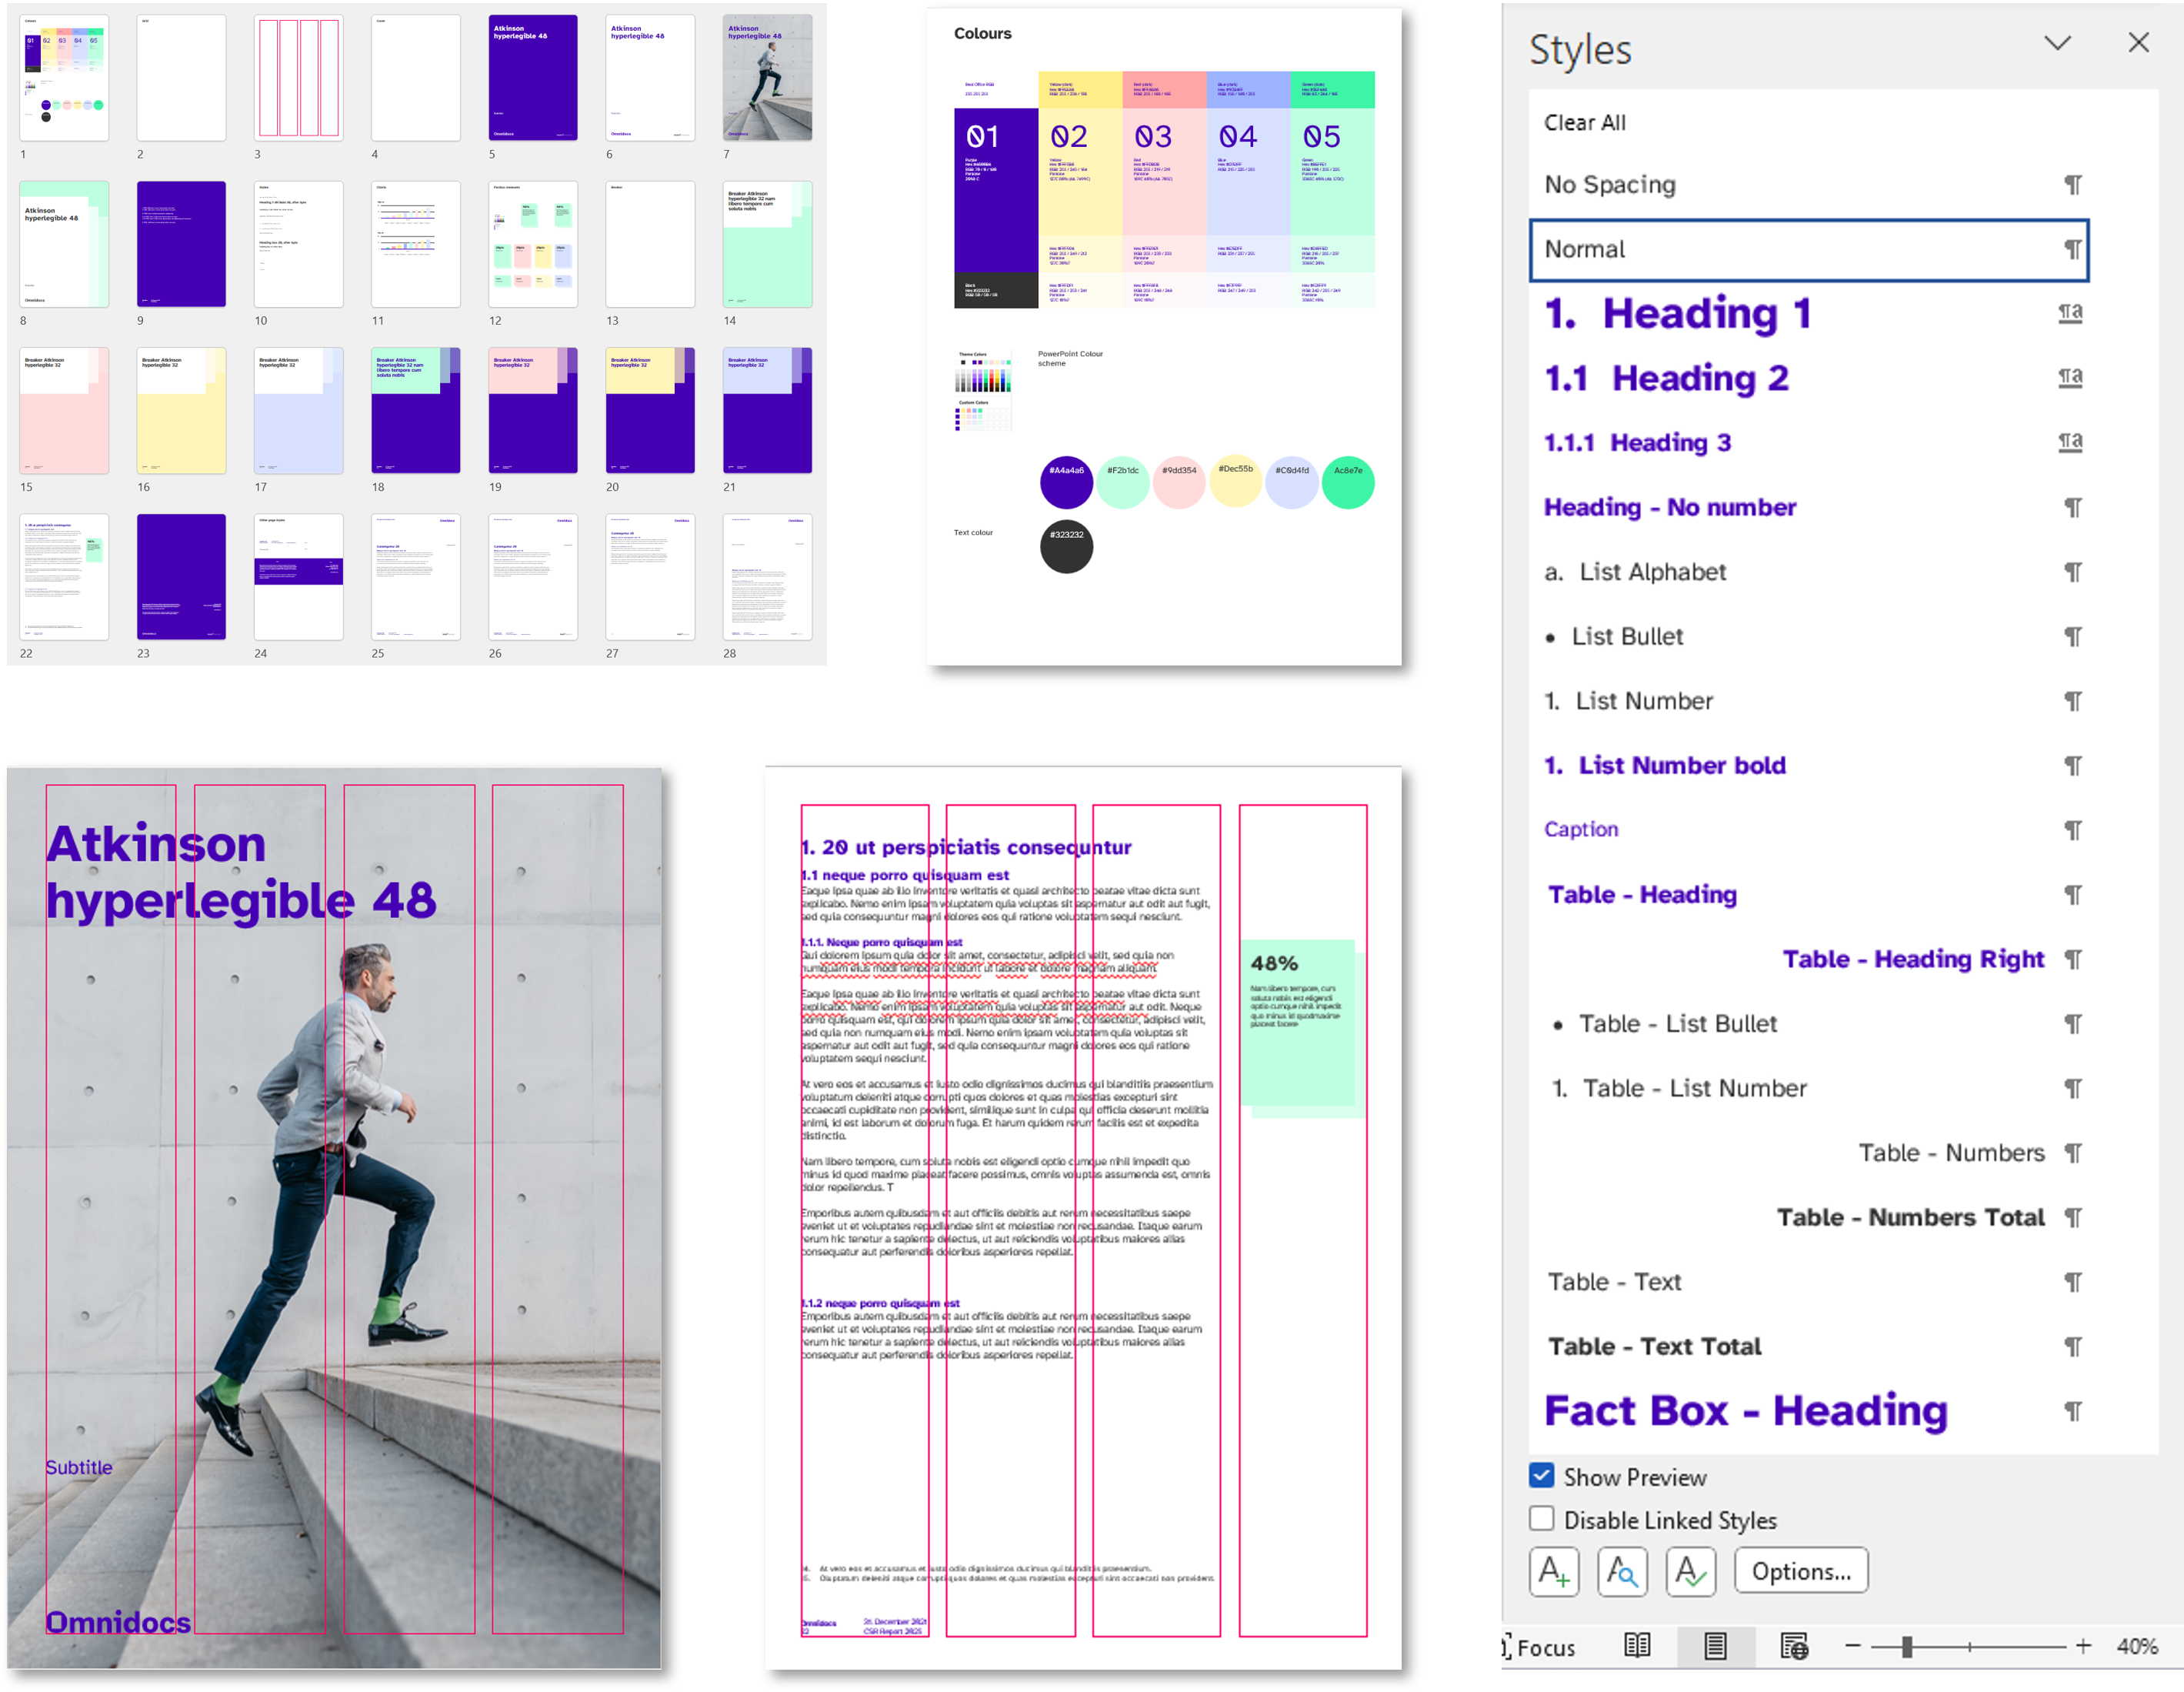 5_Word report_Design proposal, colors, grid, layouts and styles for text formatting.png